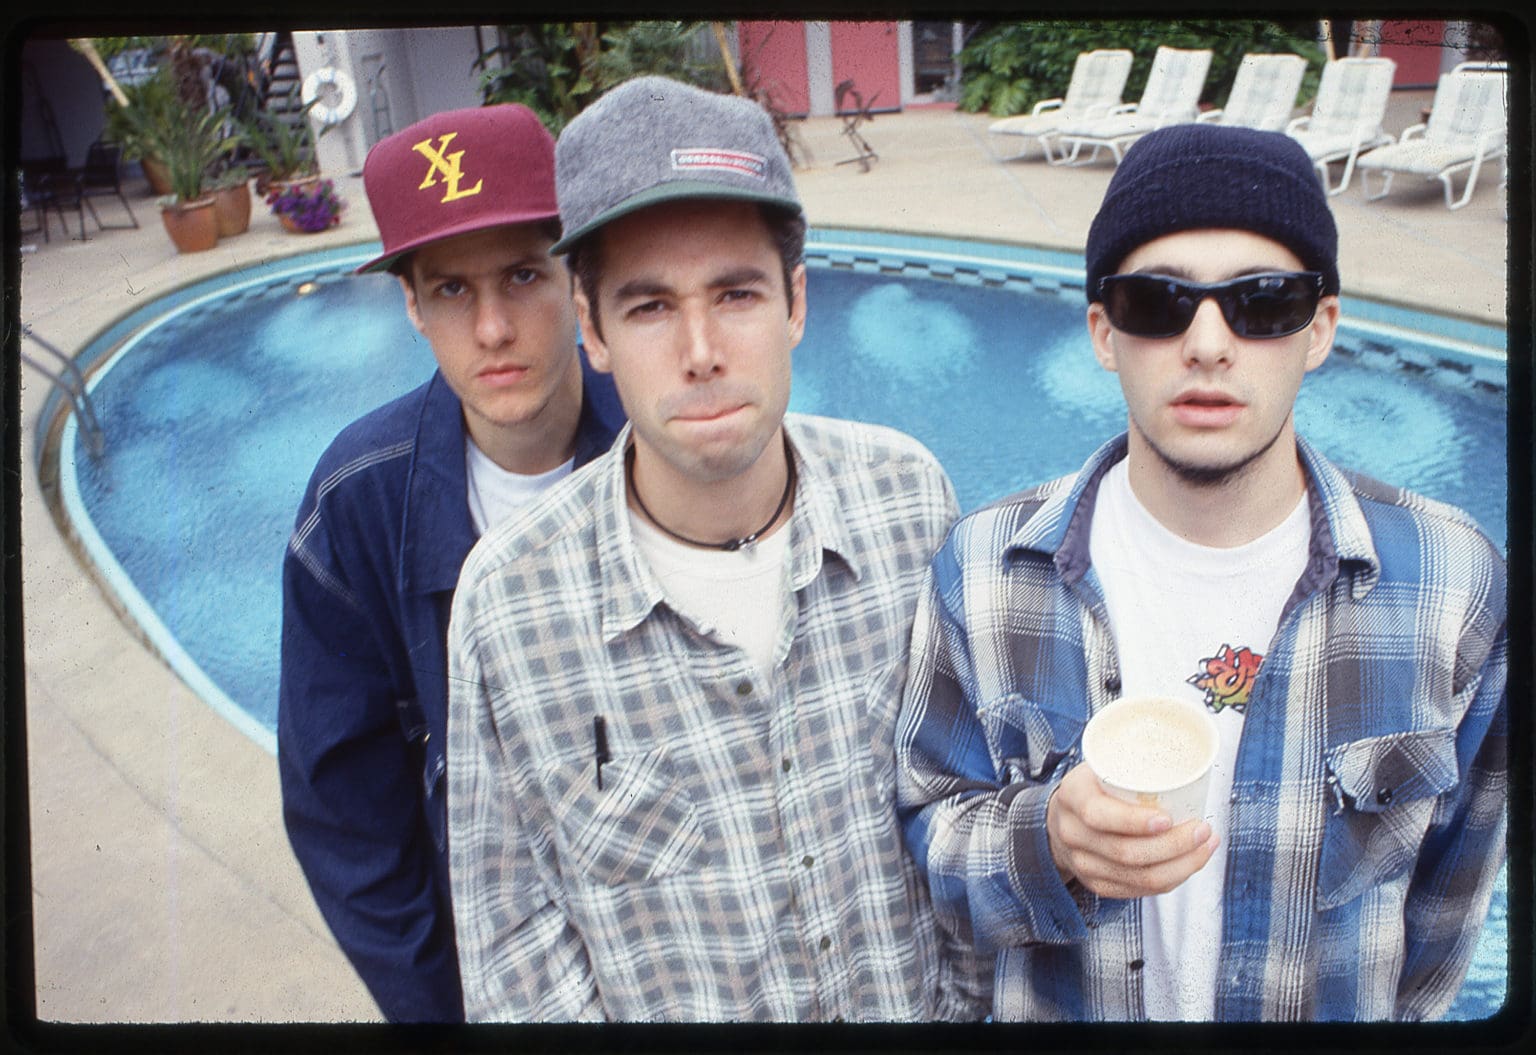 Beastie Boys Story: Mike Diamond, Adam Yauch and Adam Horovitz in 1993 from an archival photo used in “Beastie Boys Story,” premiering globally on Apple TV+ on April 24.